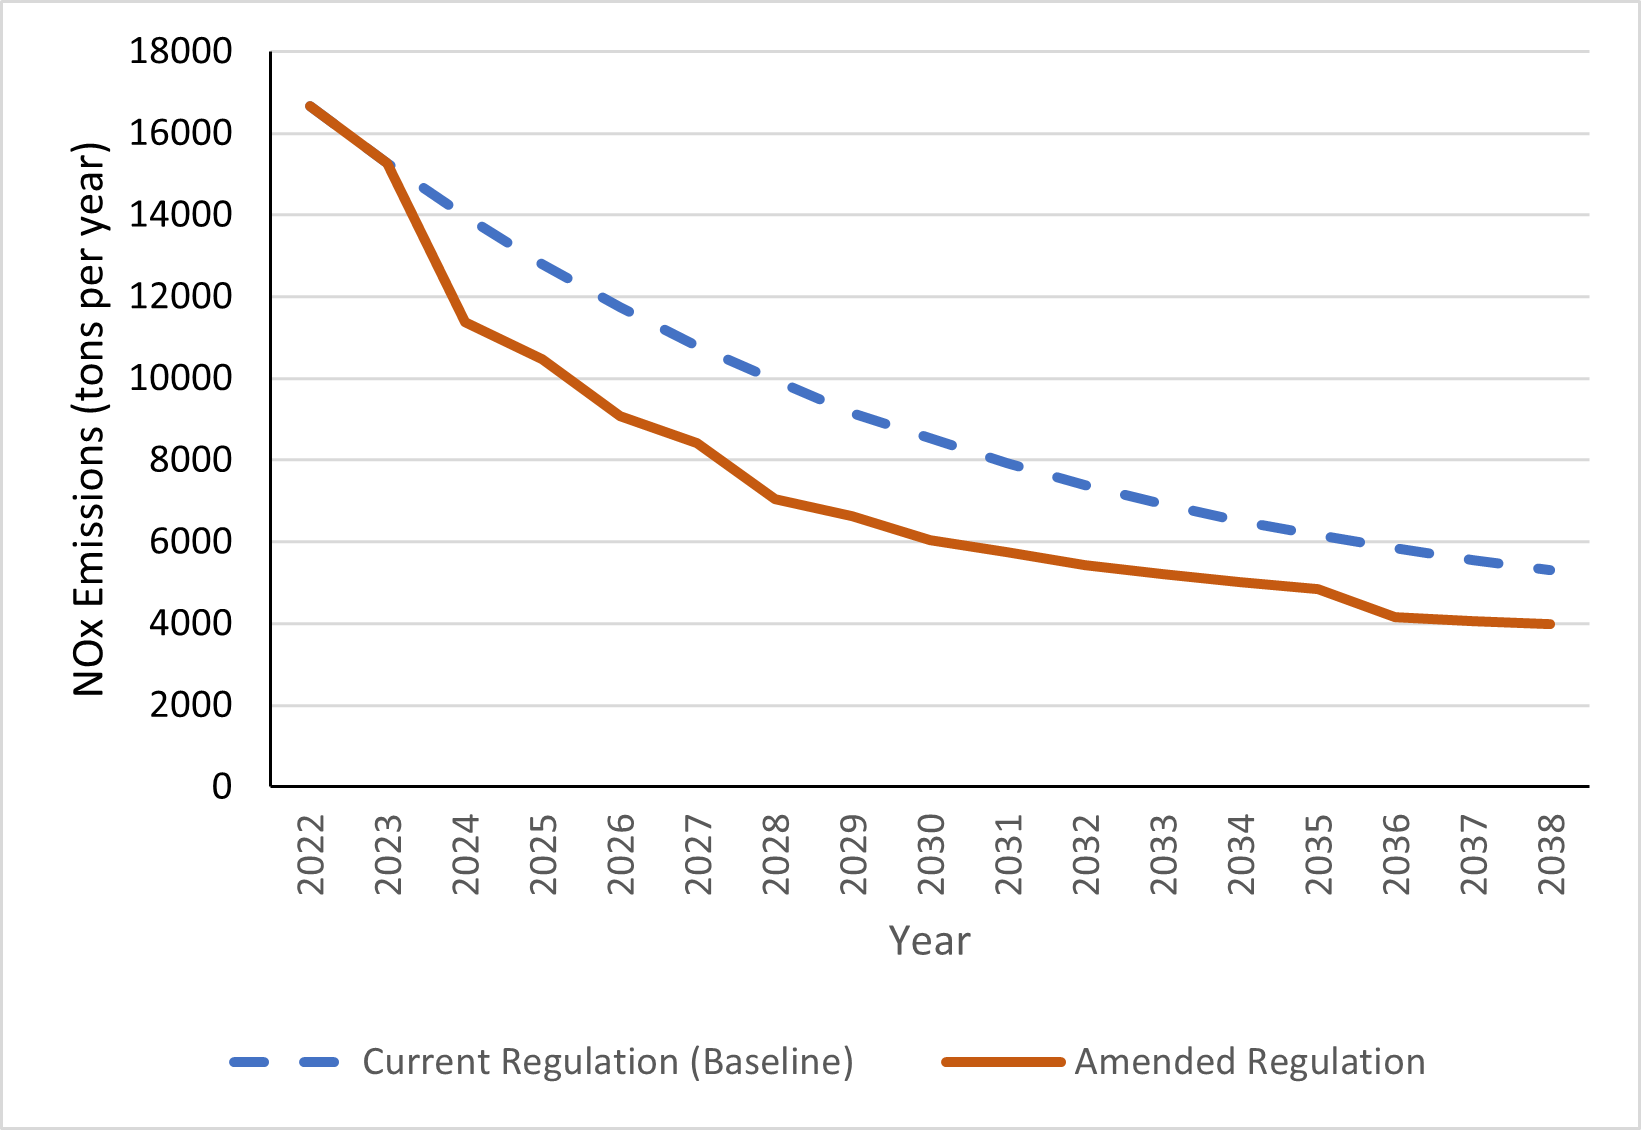 This graph shows the projected NOx emissions from off-road diesel vehicles under the Baseline scenario, represented by the dashed blue curve, and the Amendments, represented by the solid orange curve, from 2022 through 2038. The two curves begin together, with about 15300 tons of NOx per year, but diverge starting in 2024. The baseline scenario shows a continued NOx emission decrease that slightly slows around 2030. The Amendments show a quick drop in emissions in the first year, and continues to decrease, keeping a reduction of about 3000 tons of NOx per year compared to the baseline scenario, before beginning to slow in 2028, with the gap in emissions between the two scenarios slowly reduced. By 2038, the NOx emissions under the baseline scenario is projected to be 5300 tons per year, compared to the NOx emissions of 4000 tons under the Amendments.